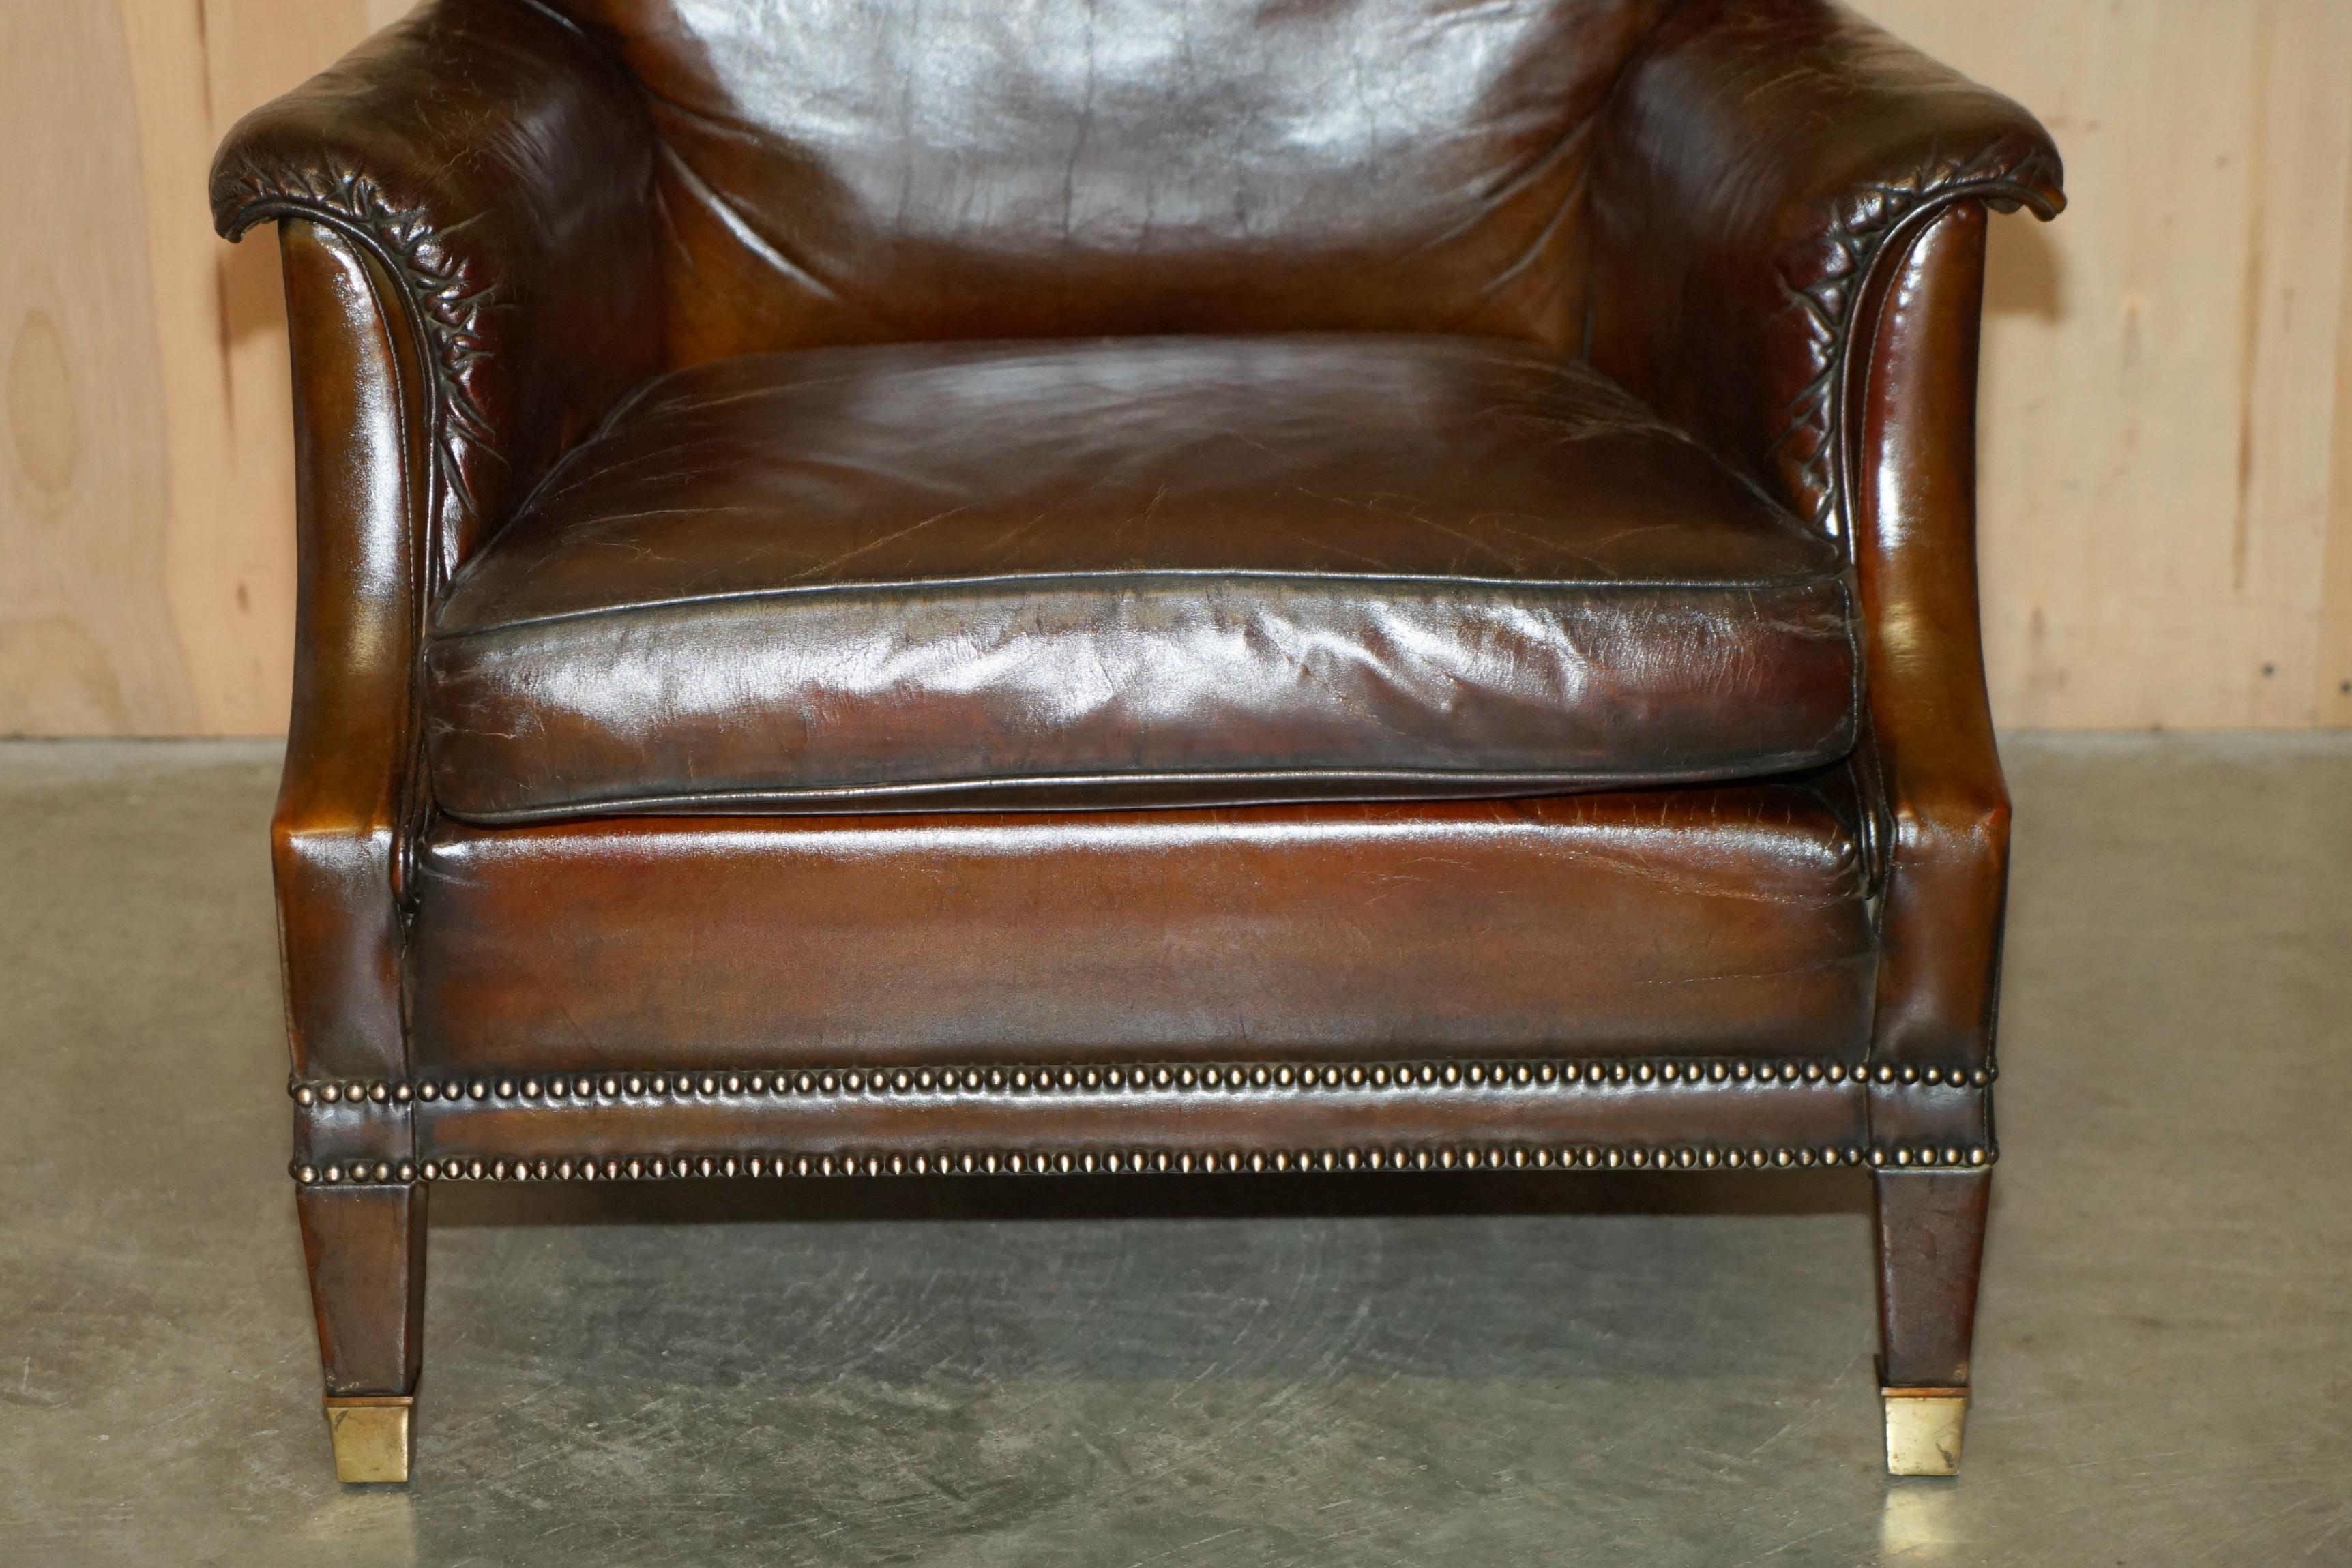 RESTORED CONTINENTAL HAND DYED BROWN LEATHER LiBRARY RECLINER ARMCHAIR & OTTOMAN 1